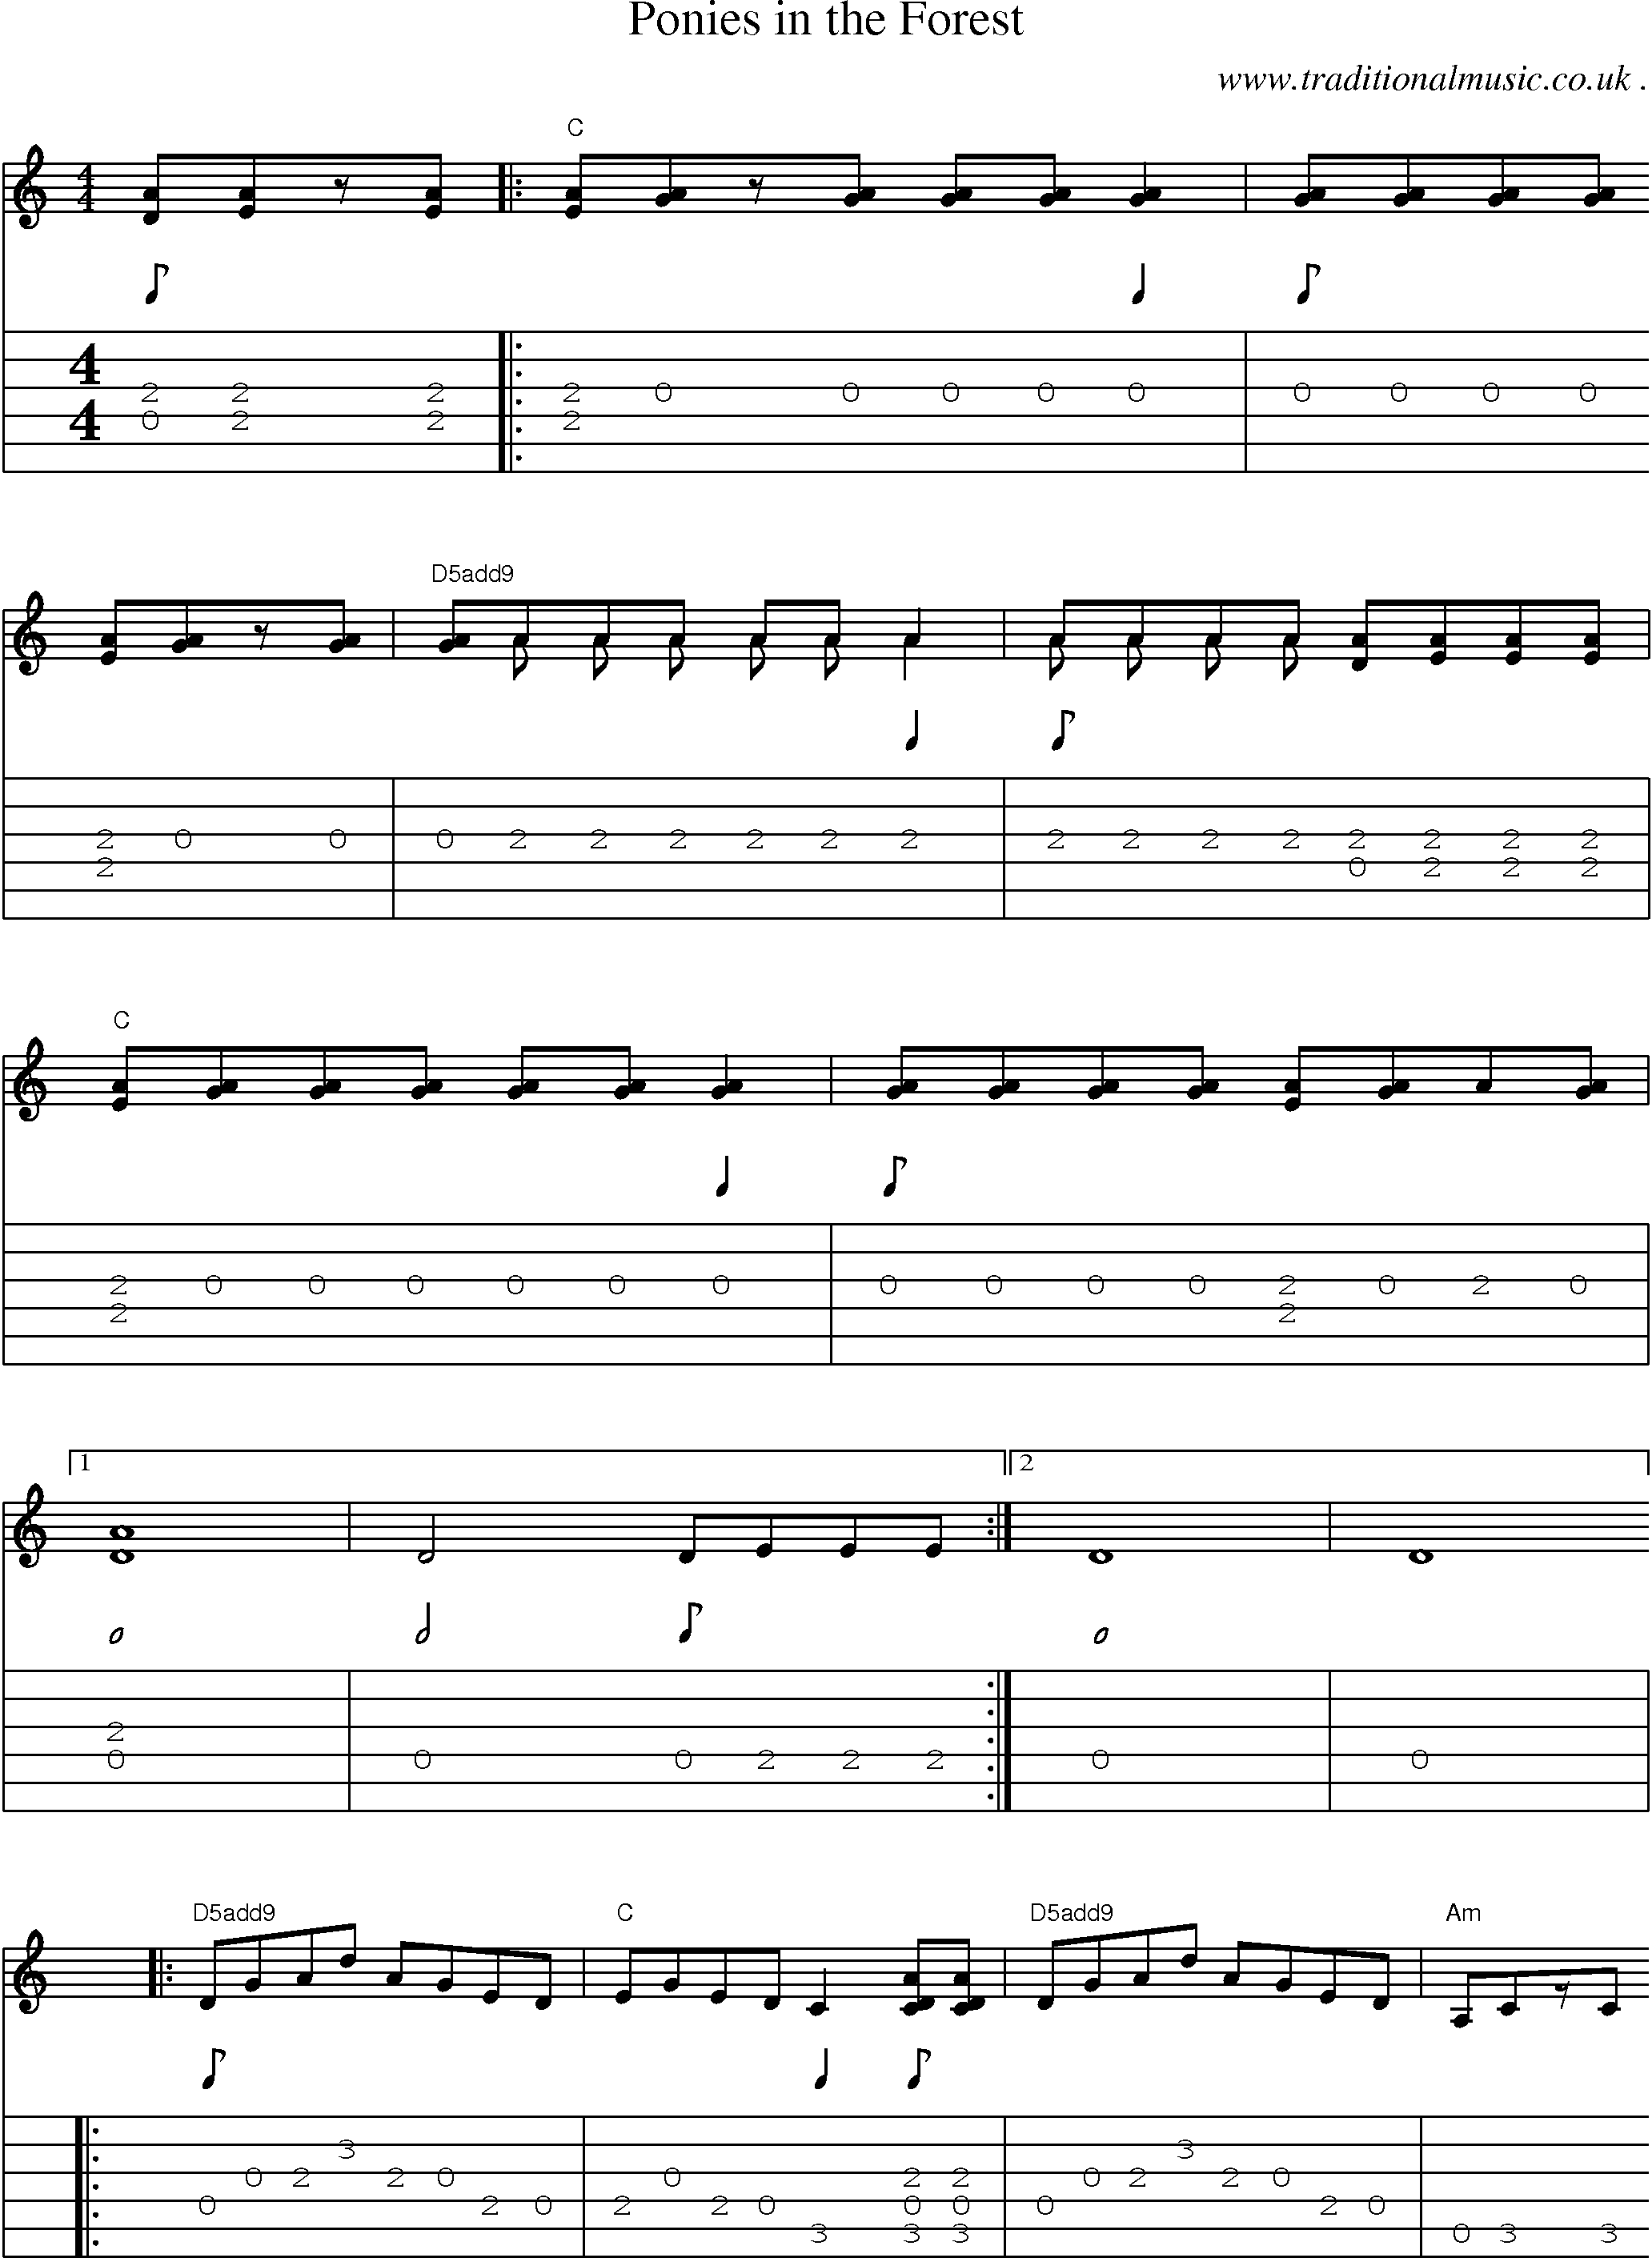 Music Score and Guitar Tabs for Ponies In The Forest